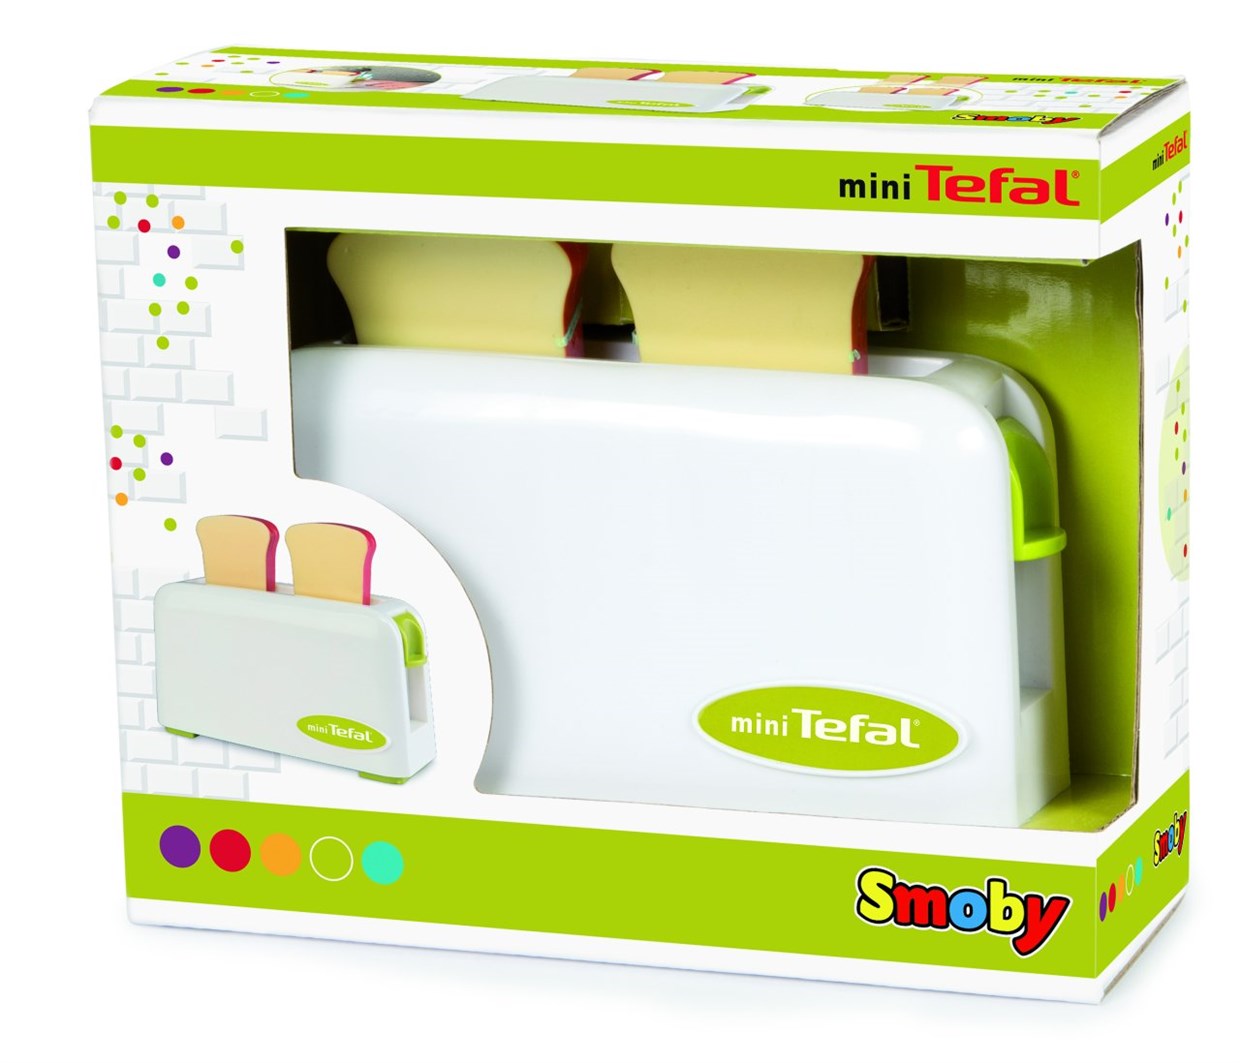 Smoby Tefal Tost Makinesi